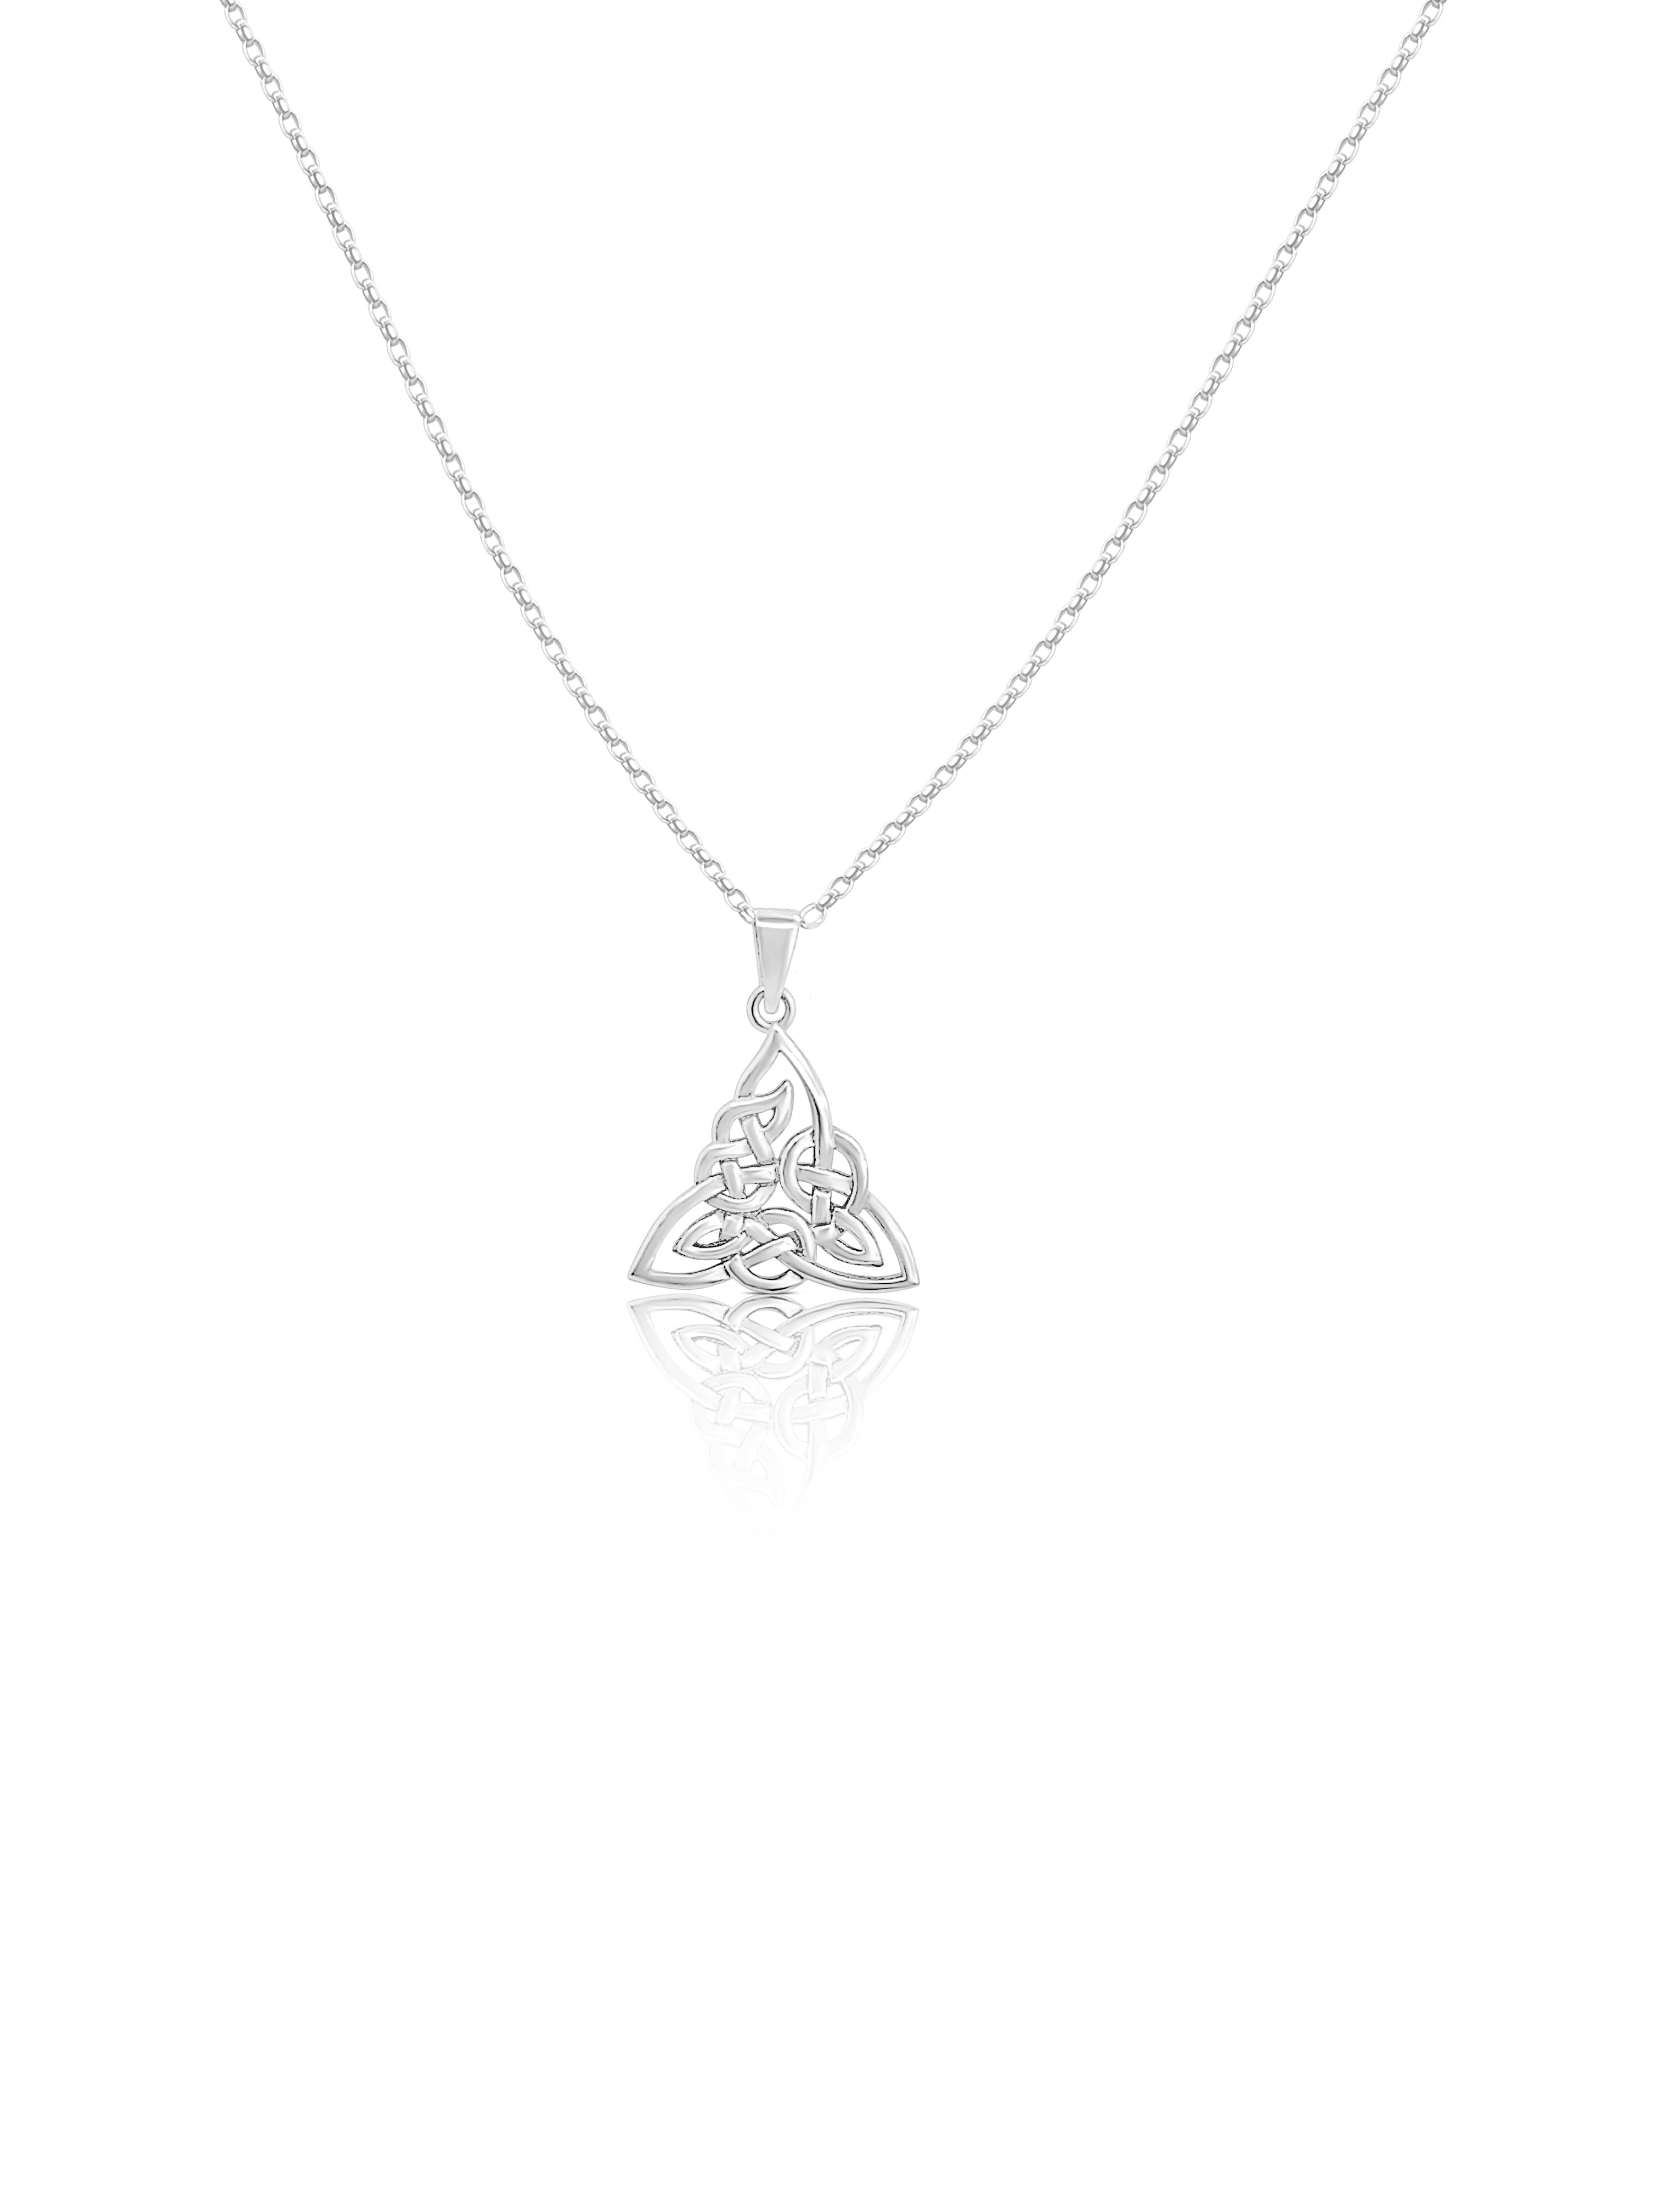 Intertwined Trinity Knot Necklace